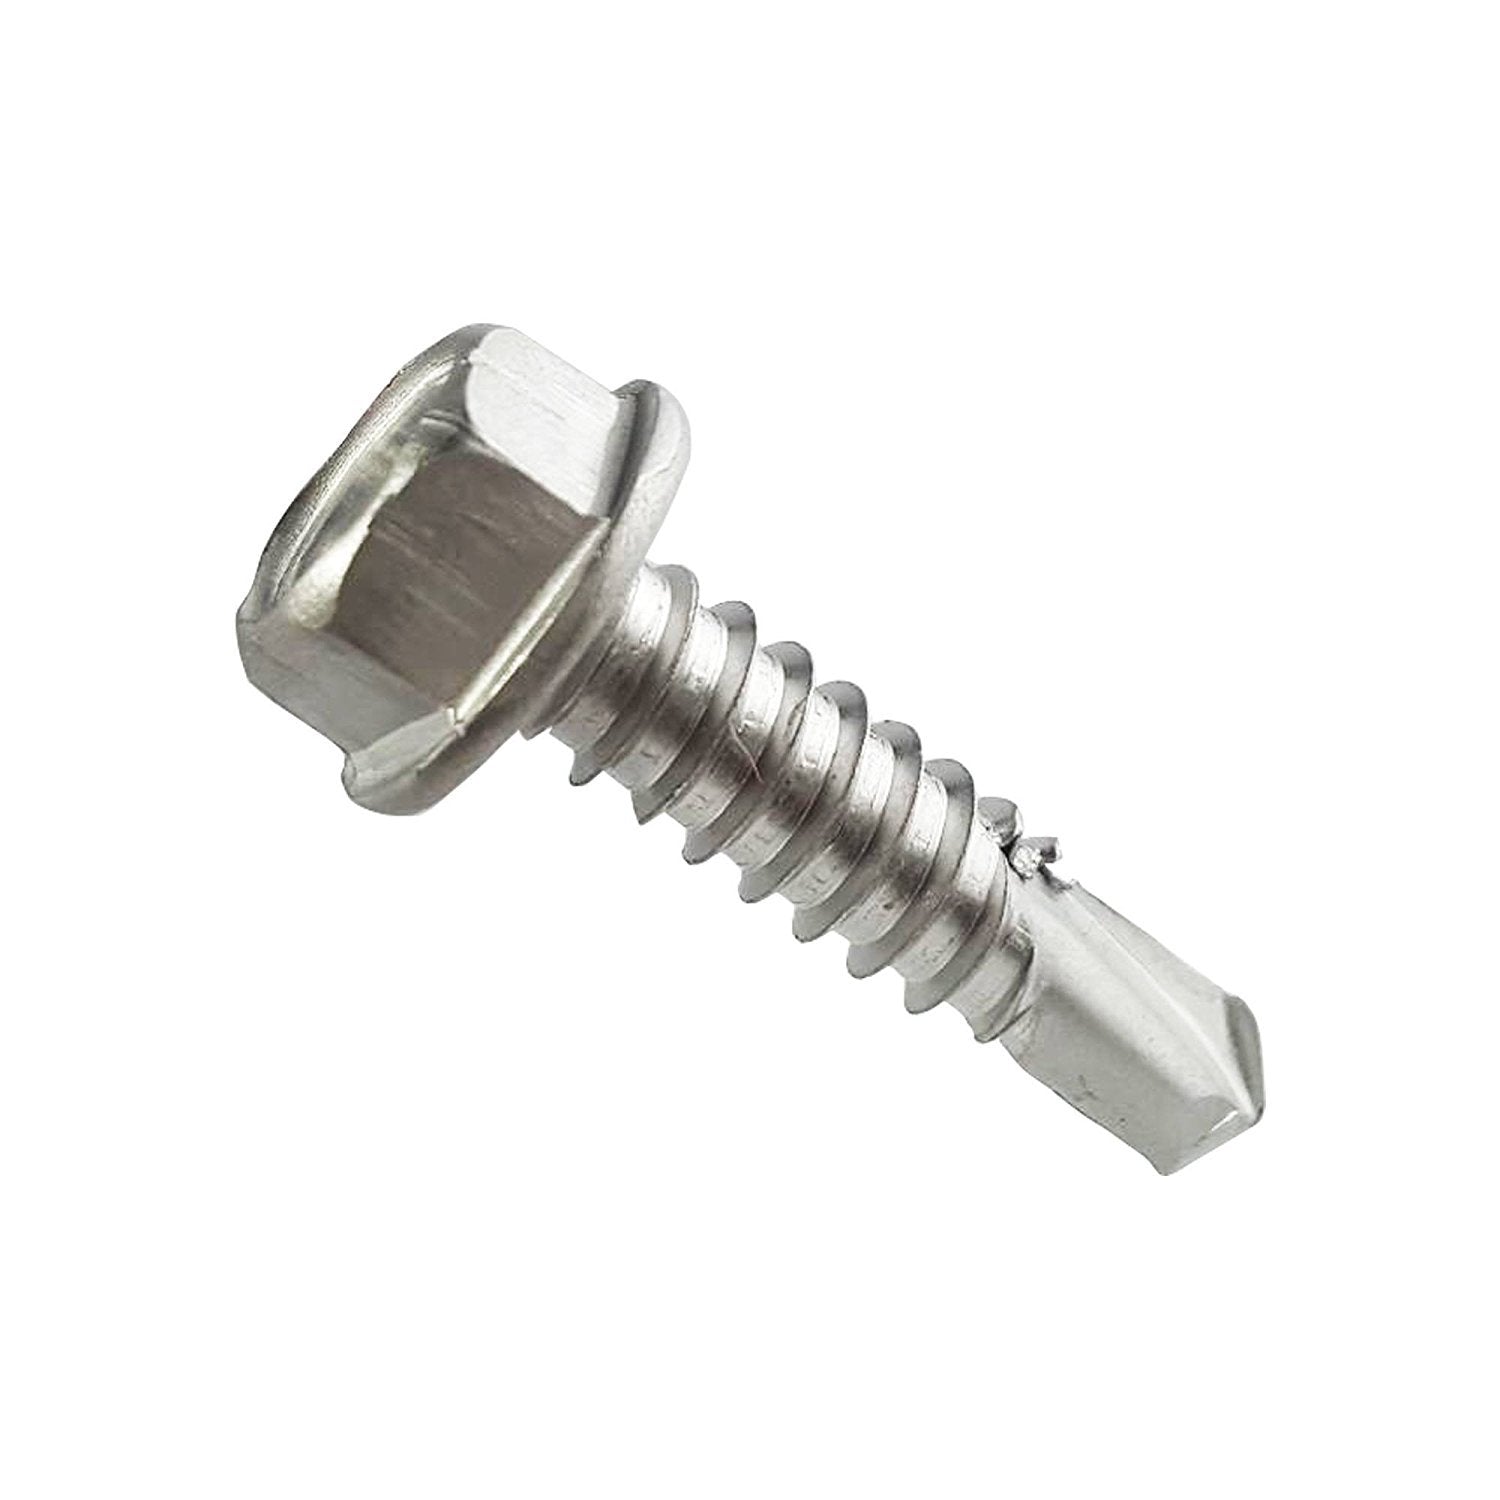 14G X 35Mm Stainless Hex Flange Head Timber Screw (500 Pack)